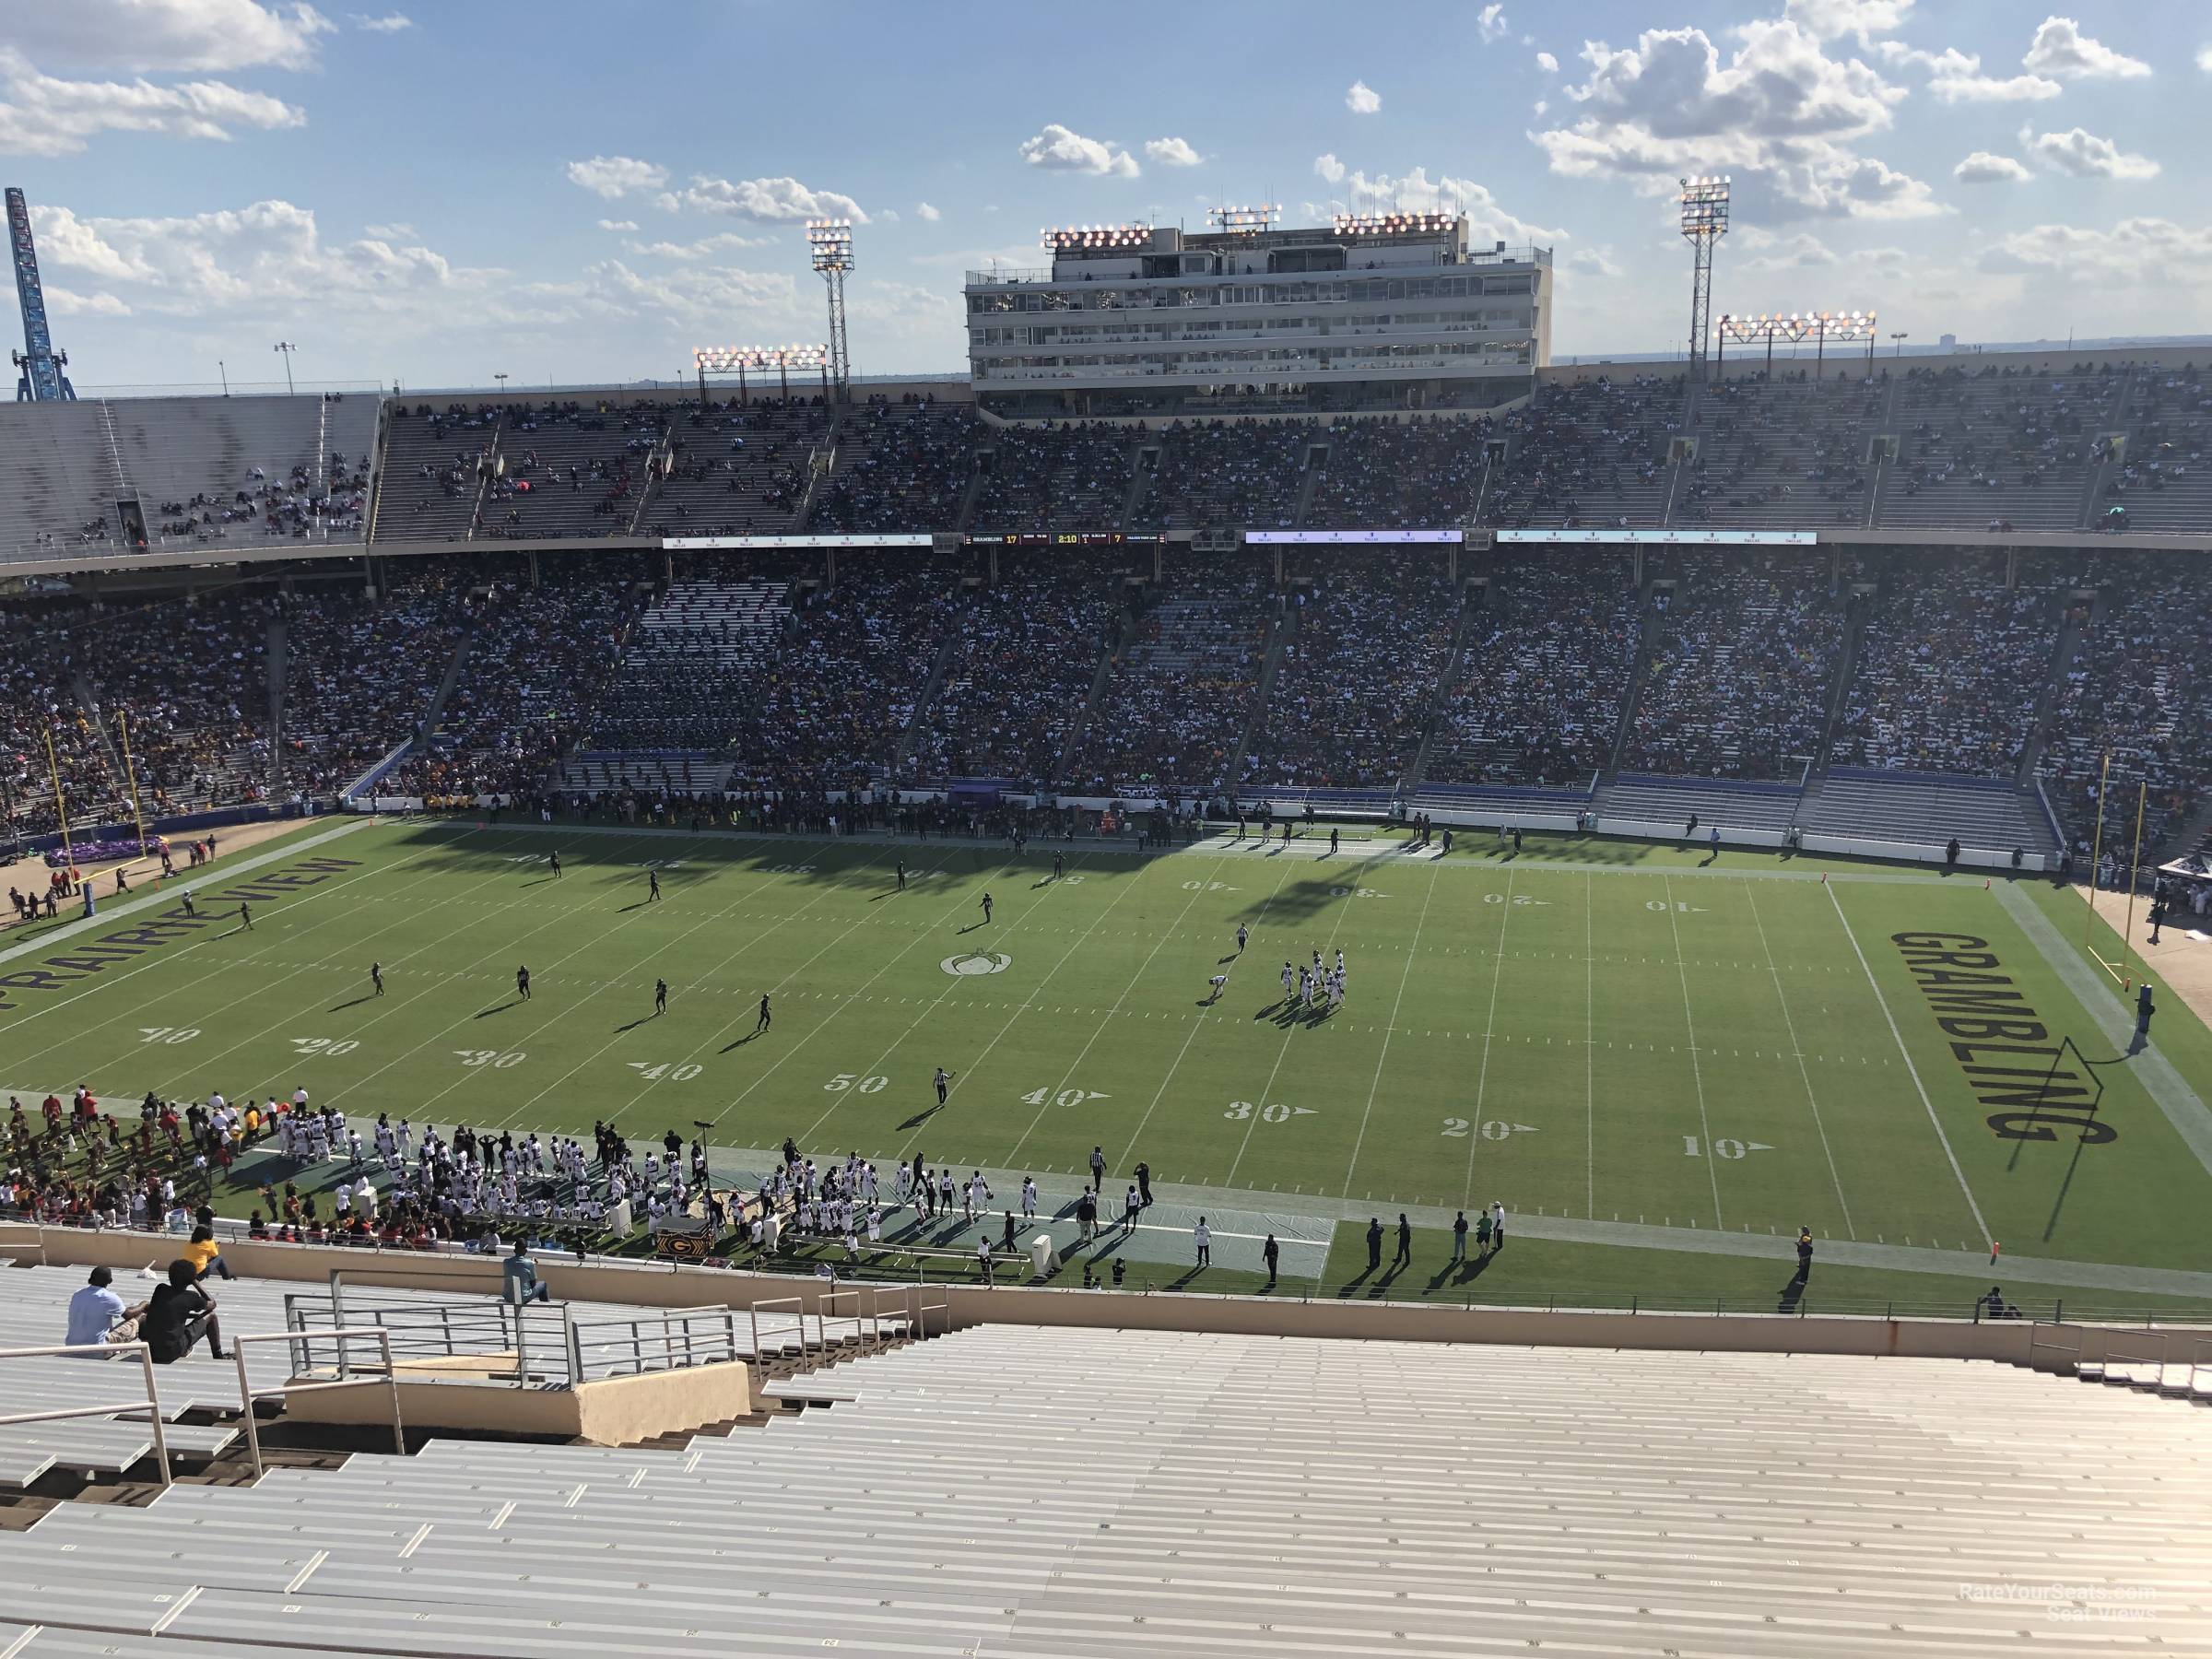 section 126, row 36 seat view  - cotton bowl